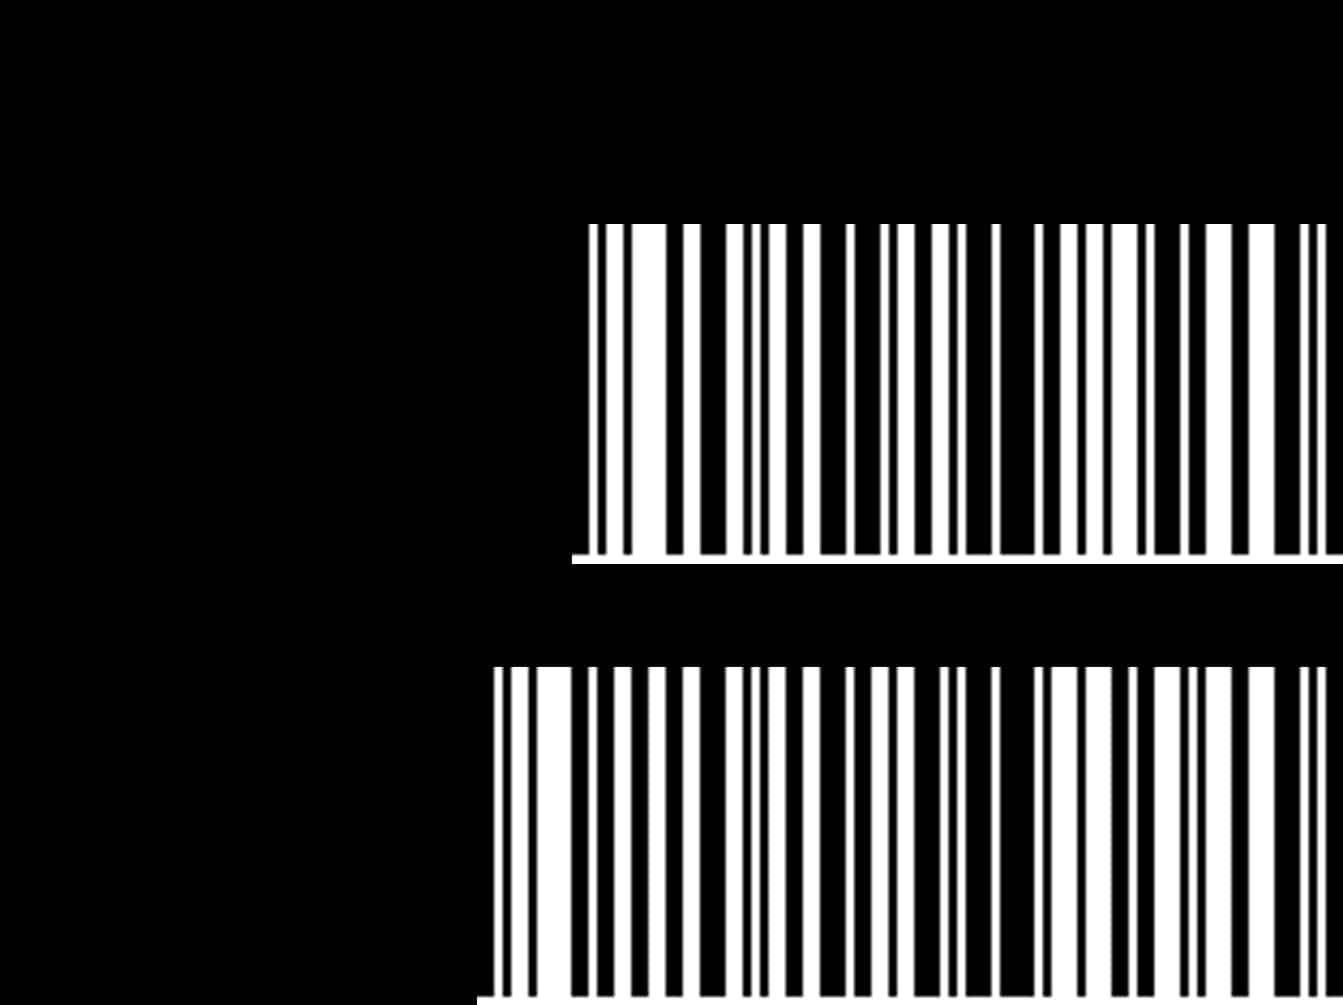 Abstract Barcode Design PNG